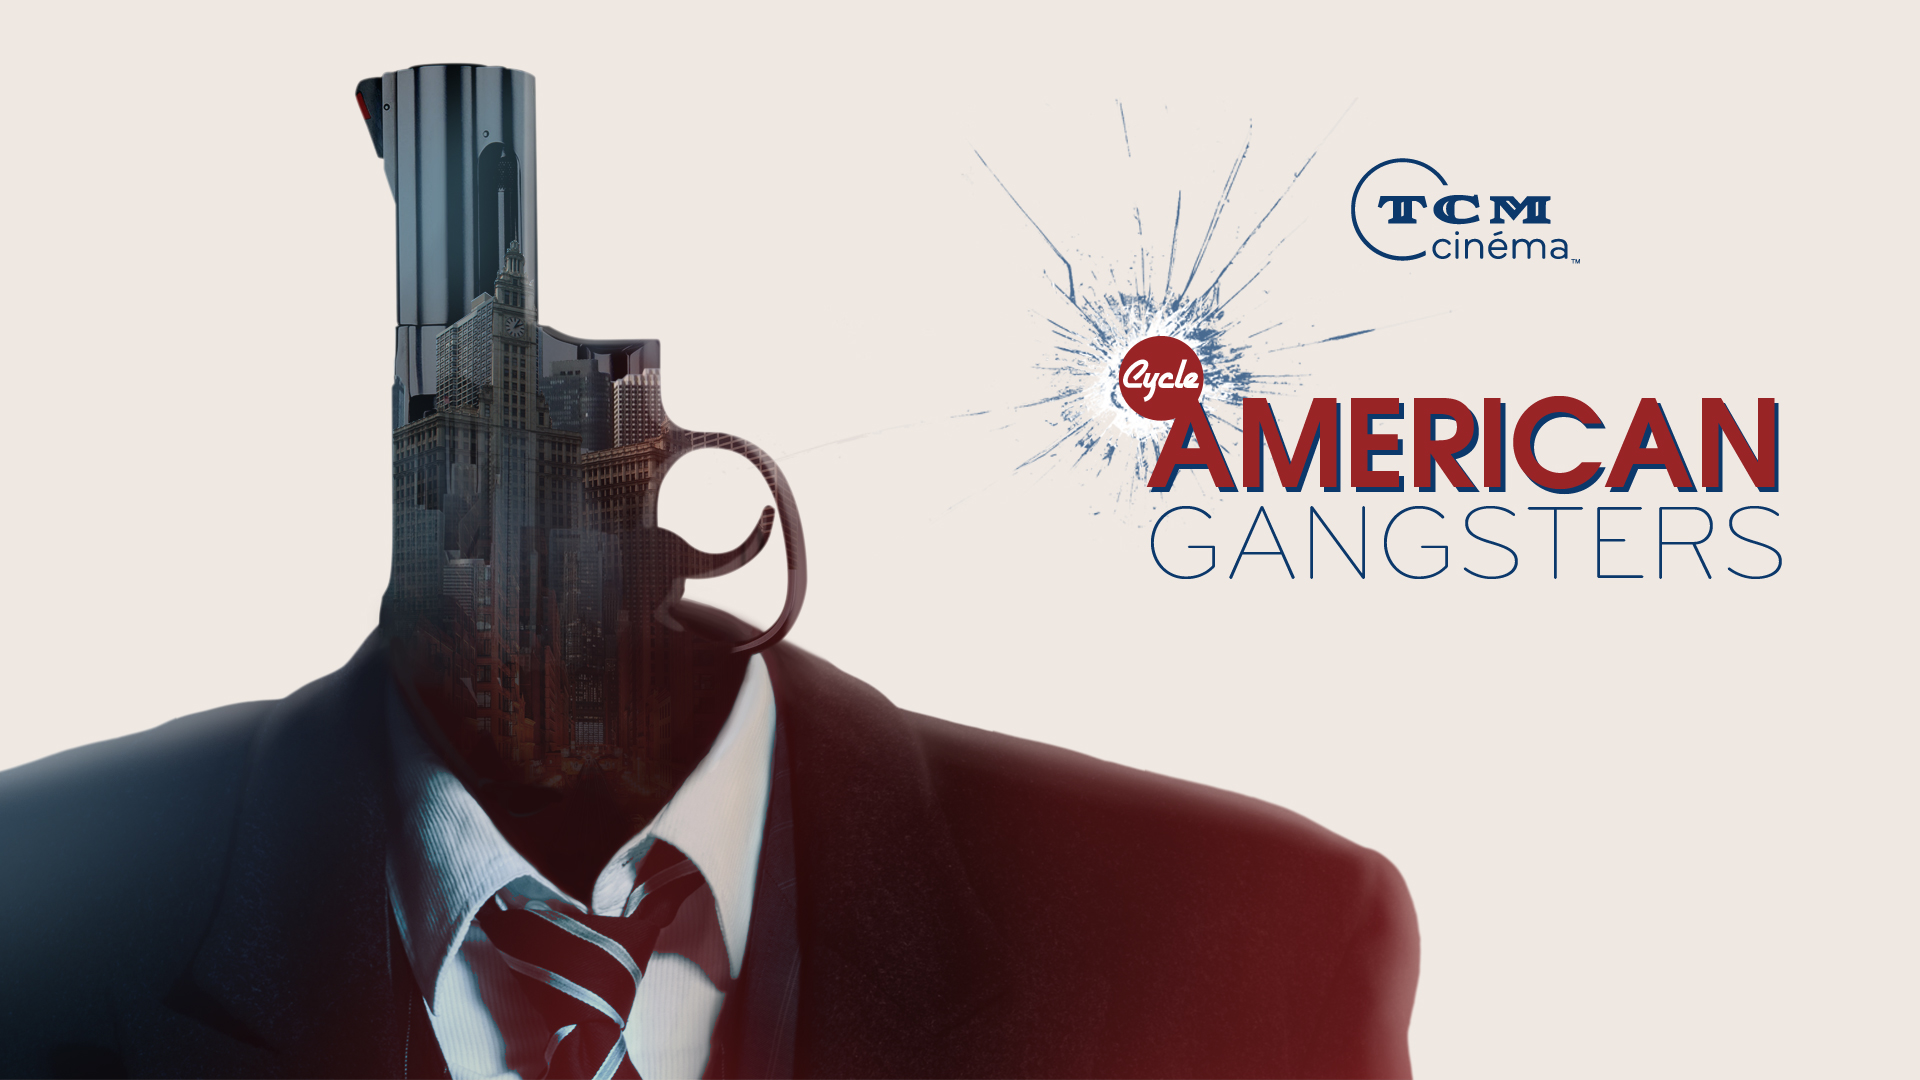 Cycle American Gangsters TCM Cinéma - Visuel - Go with the Blog